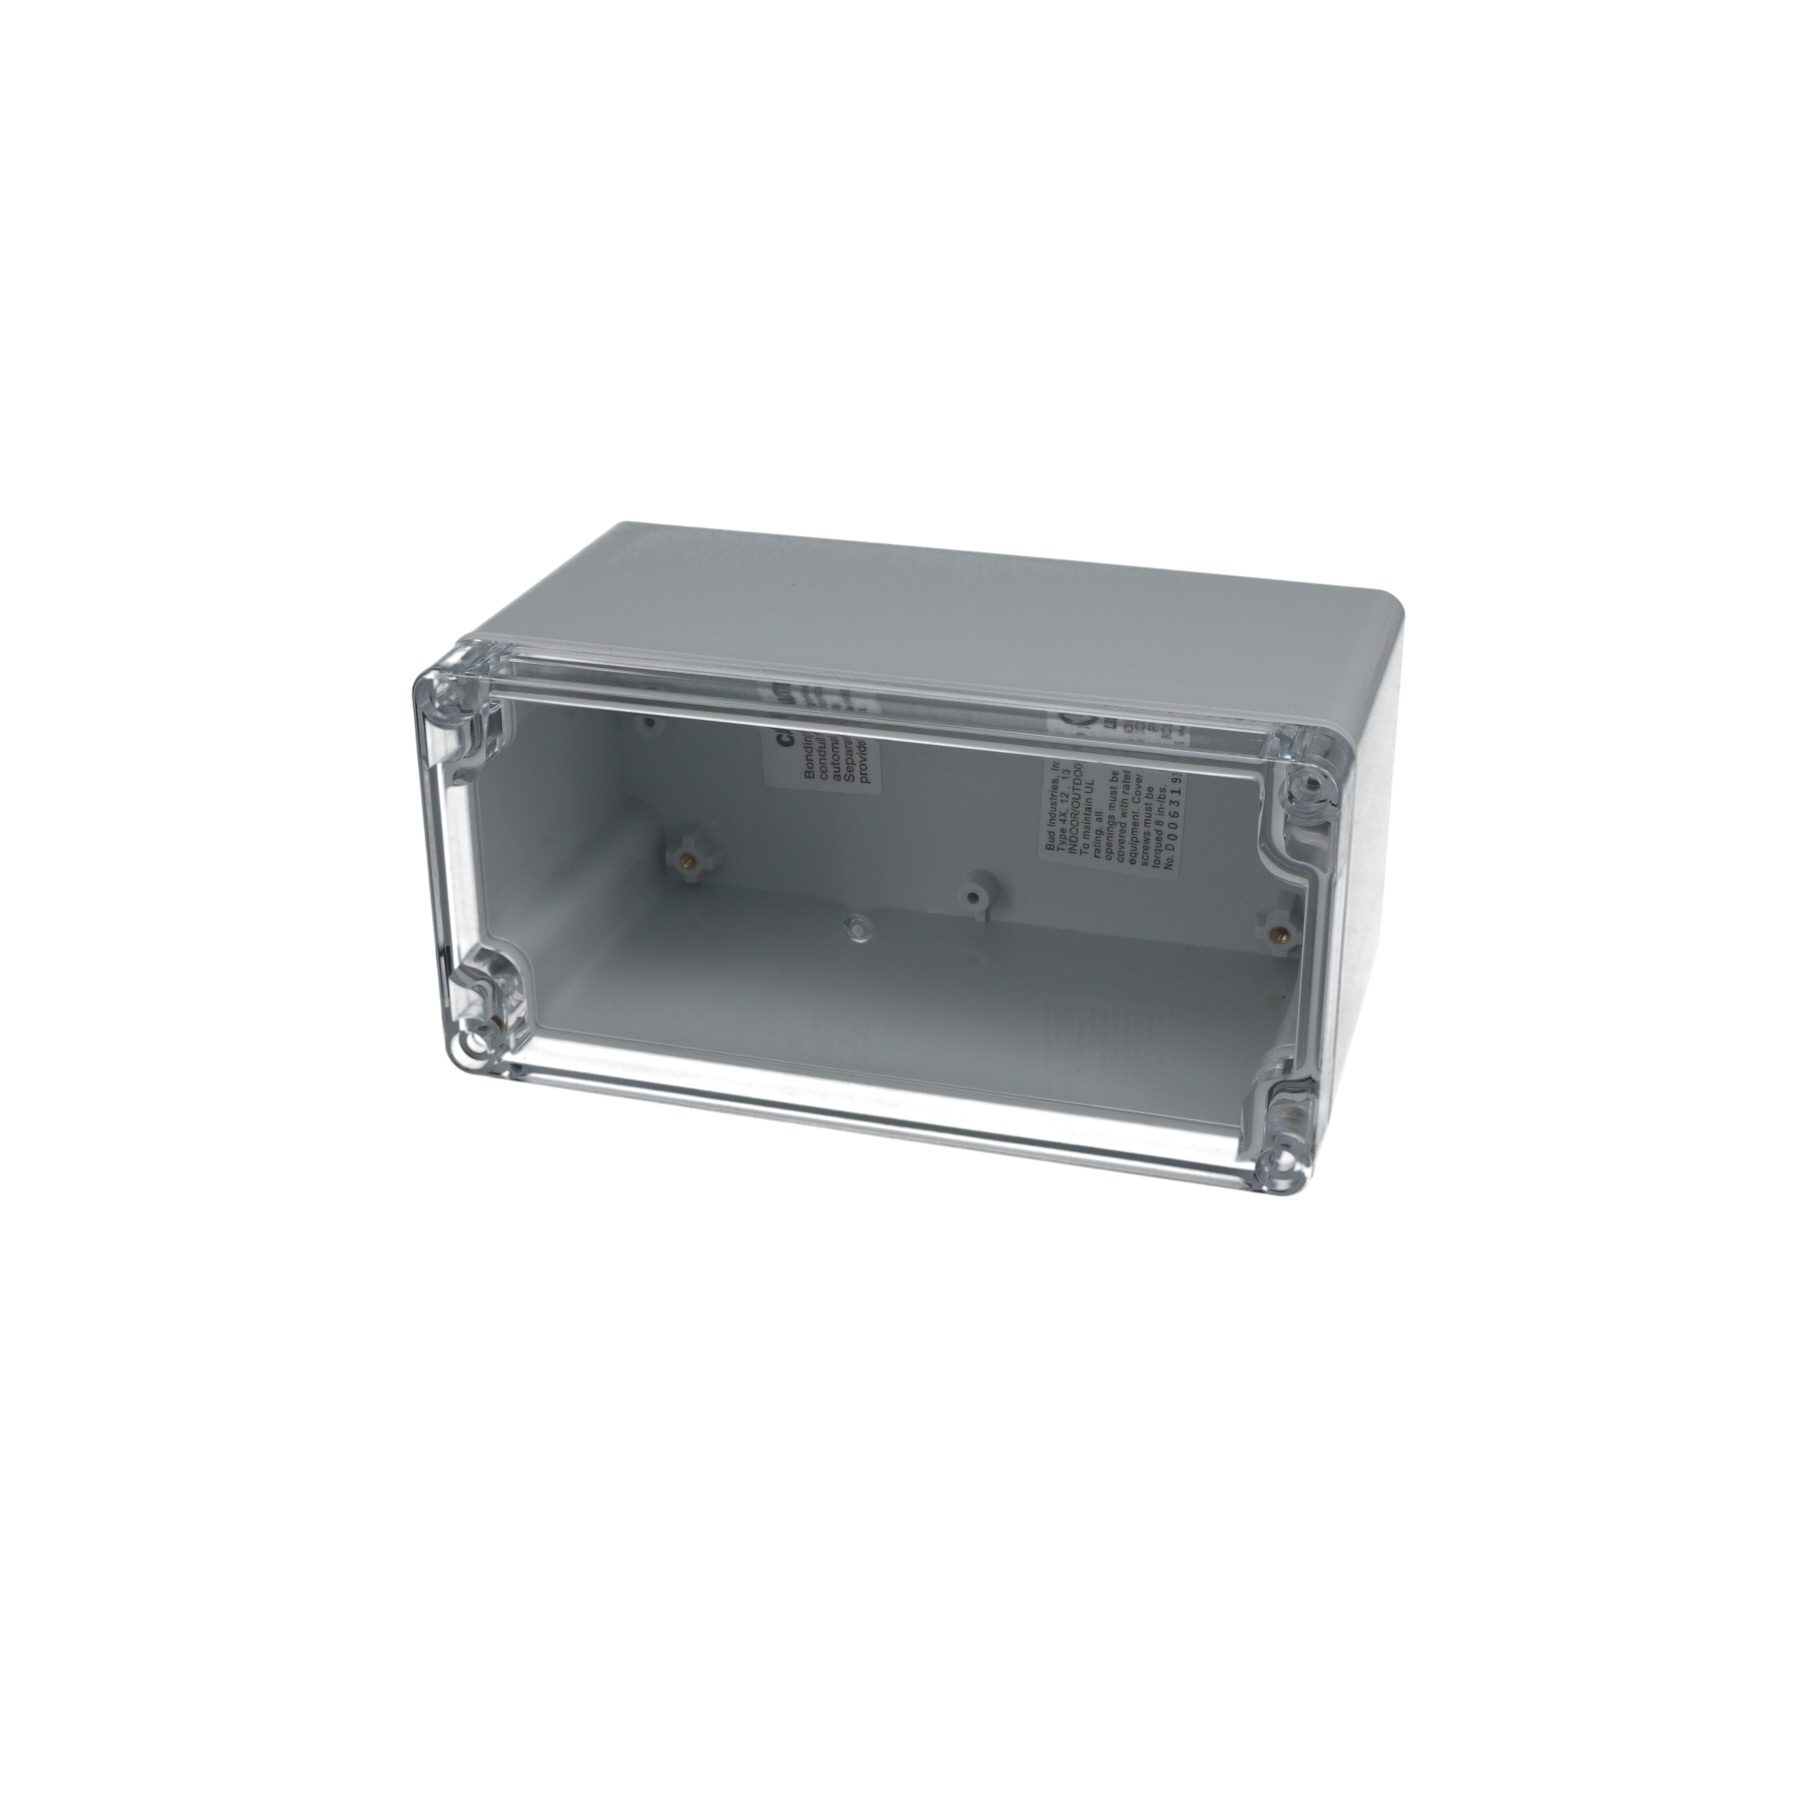 IP65 NEMA 4X Box with Clear Cover PN-1333-C